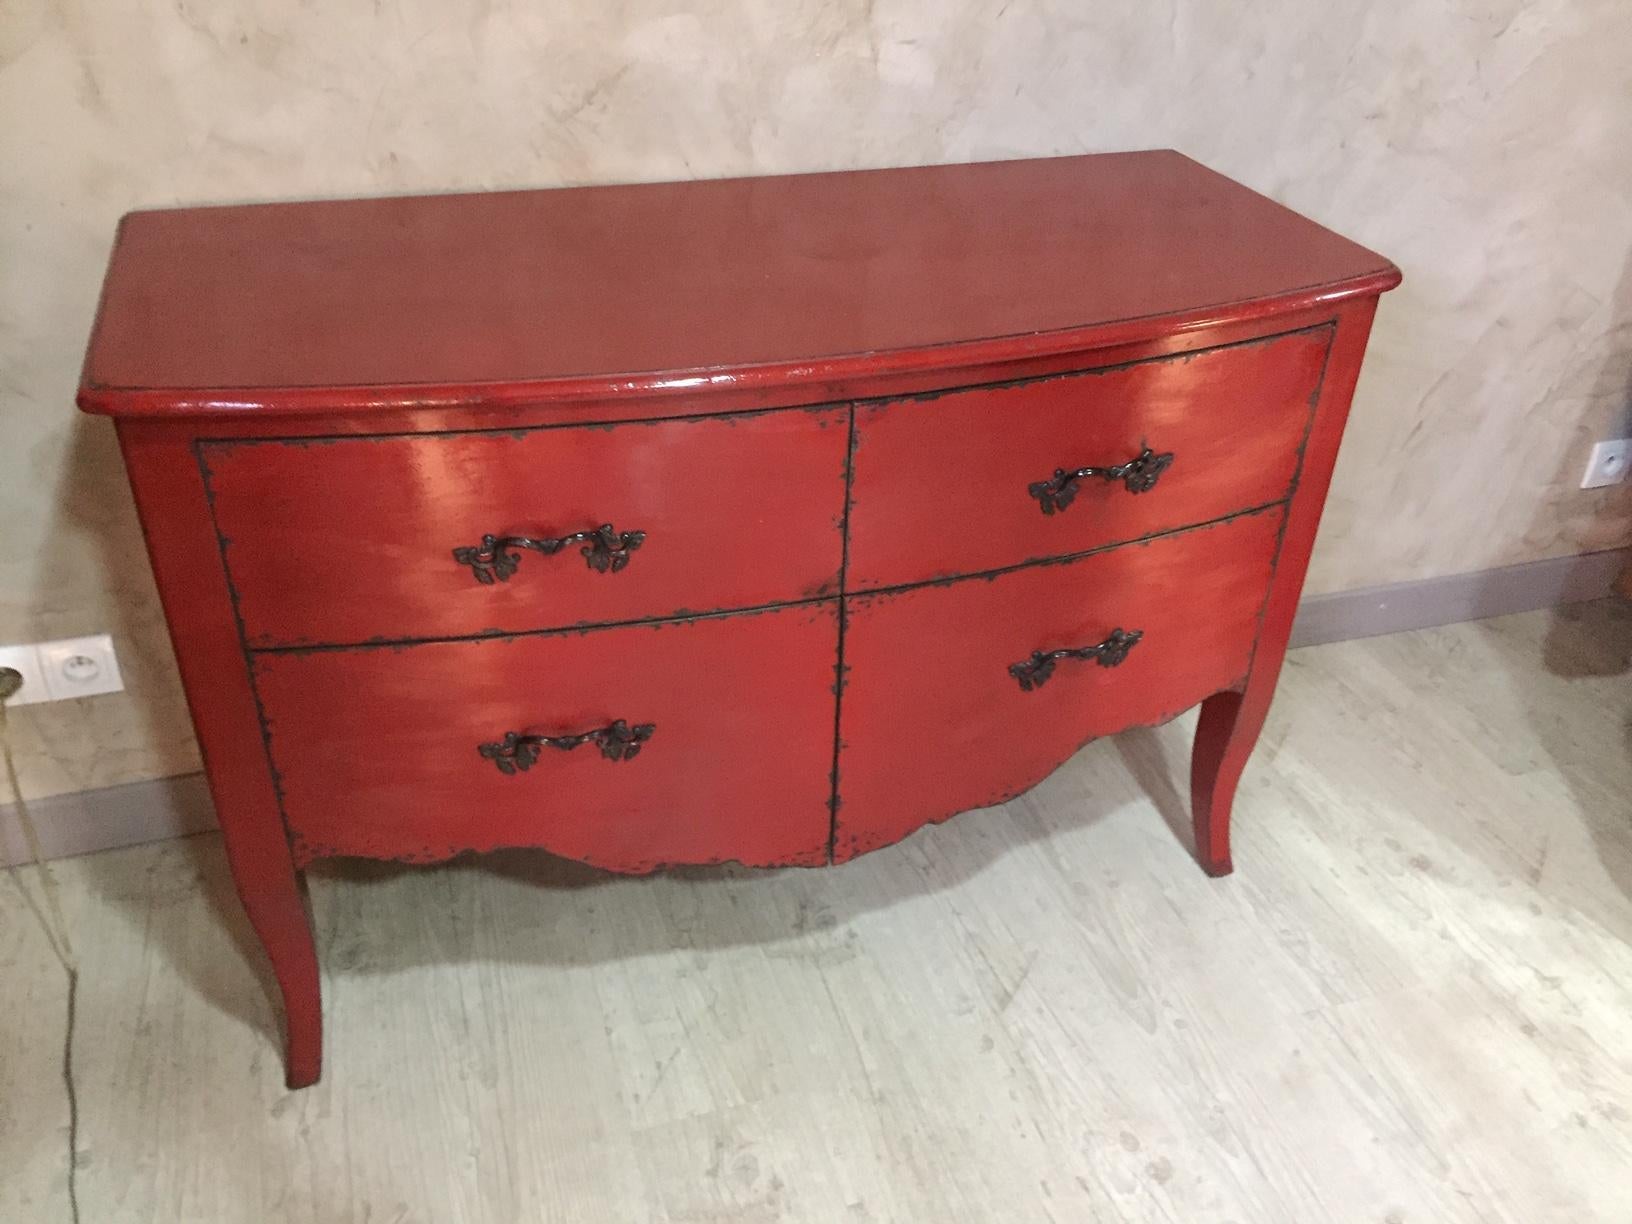 Beautiful 20th century Regency style red patinated commode.
Four large drawers. Nice patina.